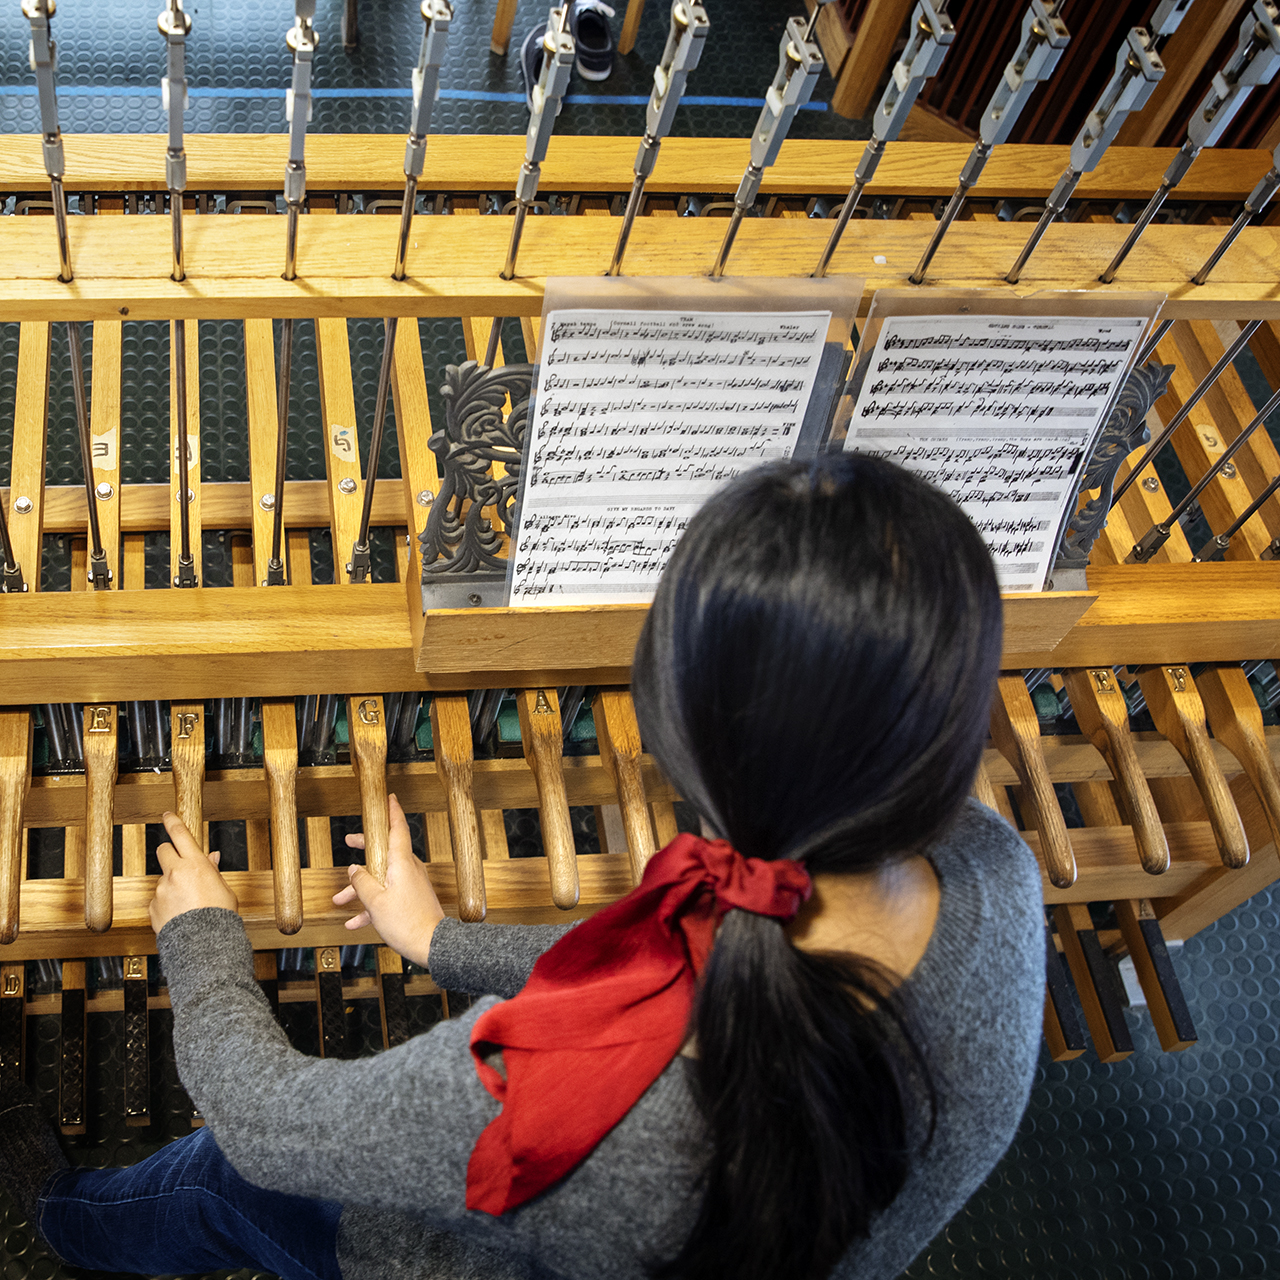 A student playing the chimes.